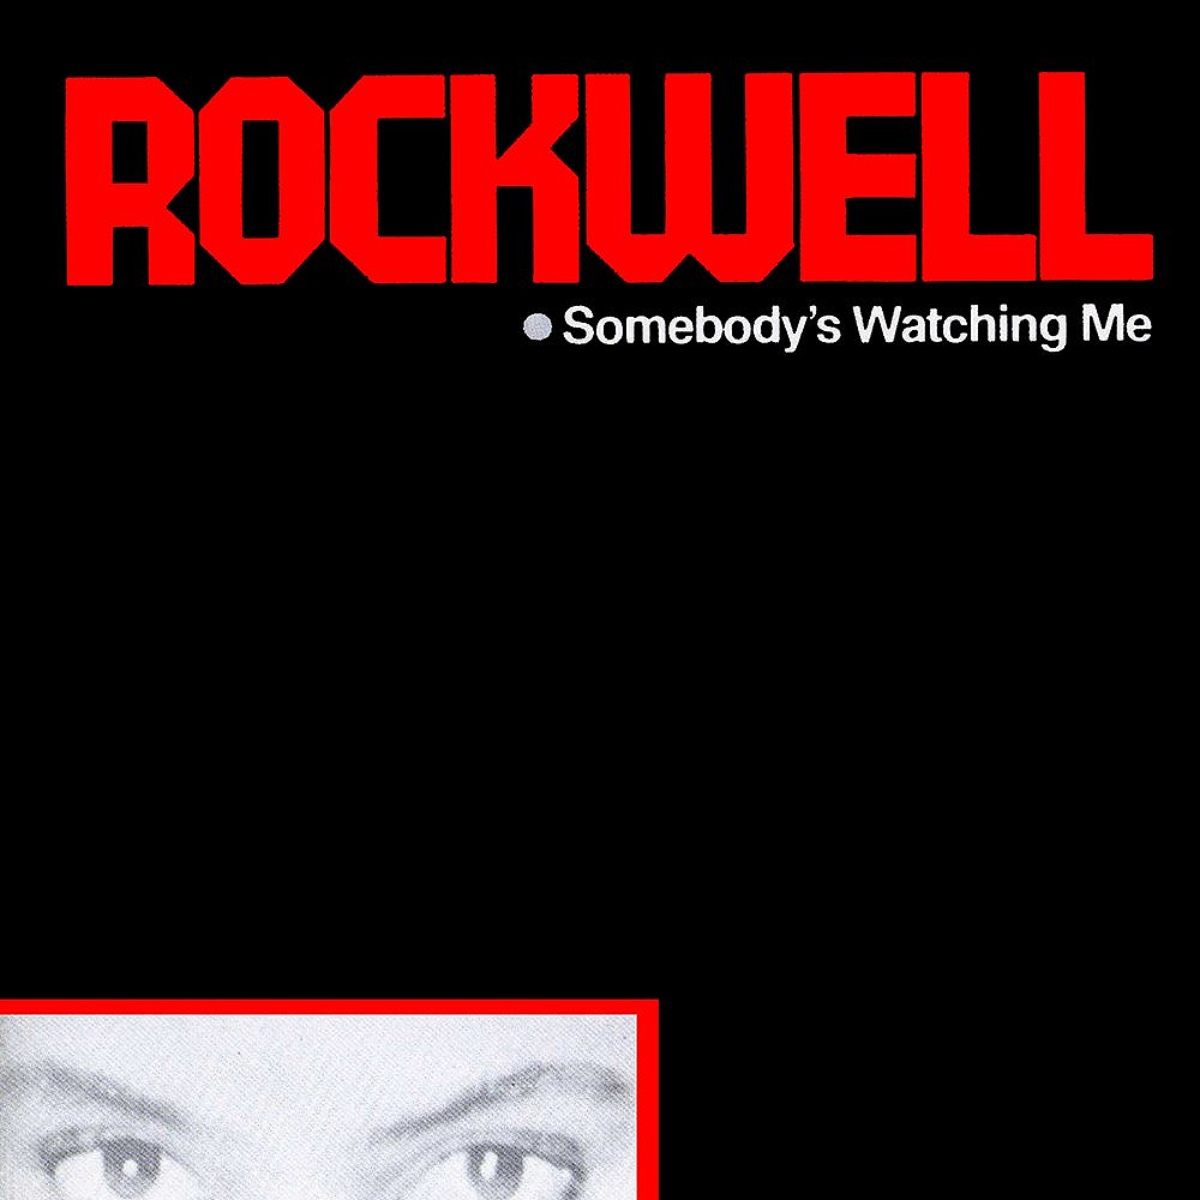 Somebody's Watching Me (1984) - Rockwell - Single cover